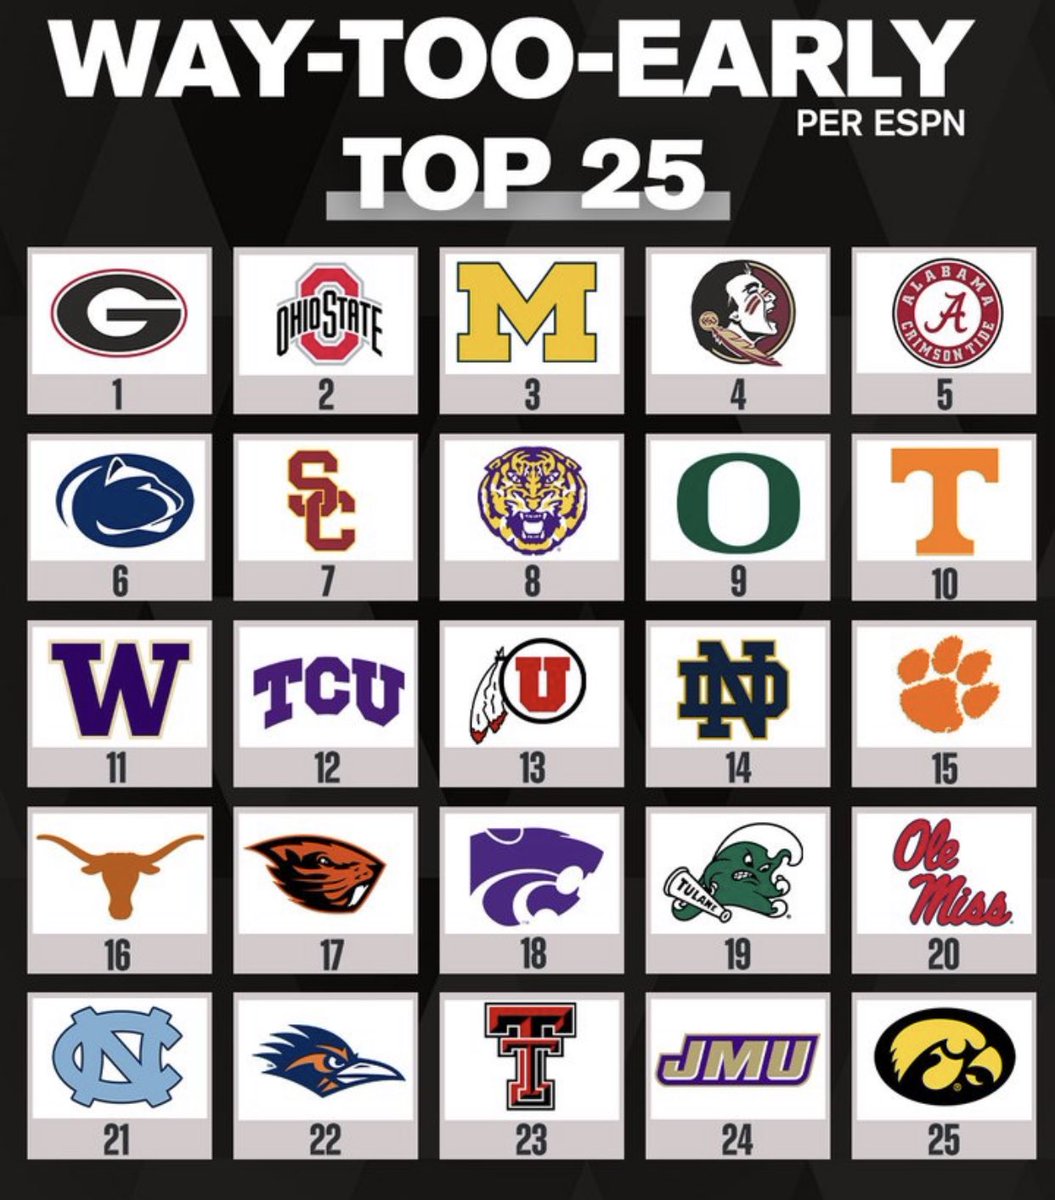 ESPN’s “Way too early” top 25 rankings for the 2023-2024 season of the college football rankings are in! https://t.co/1BfpMU40hJ